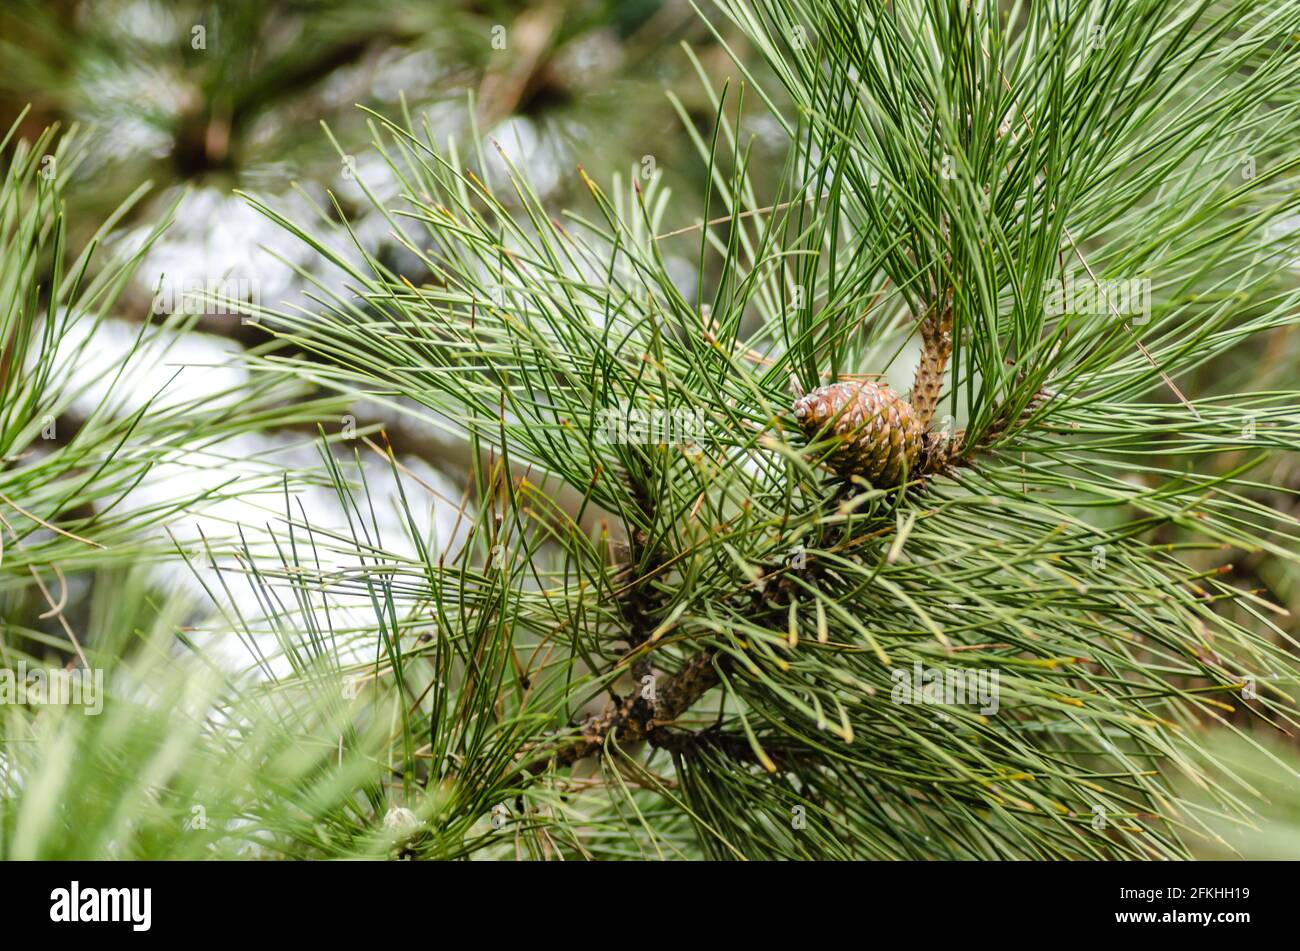 Pine tree branch with cones in spring Stock Photo